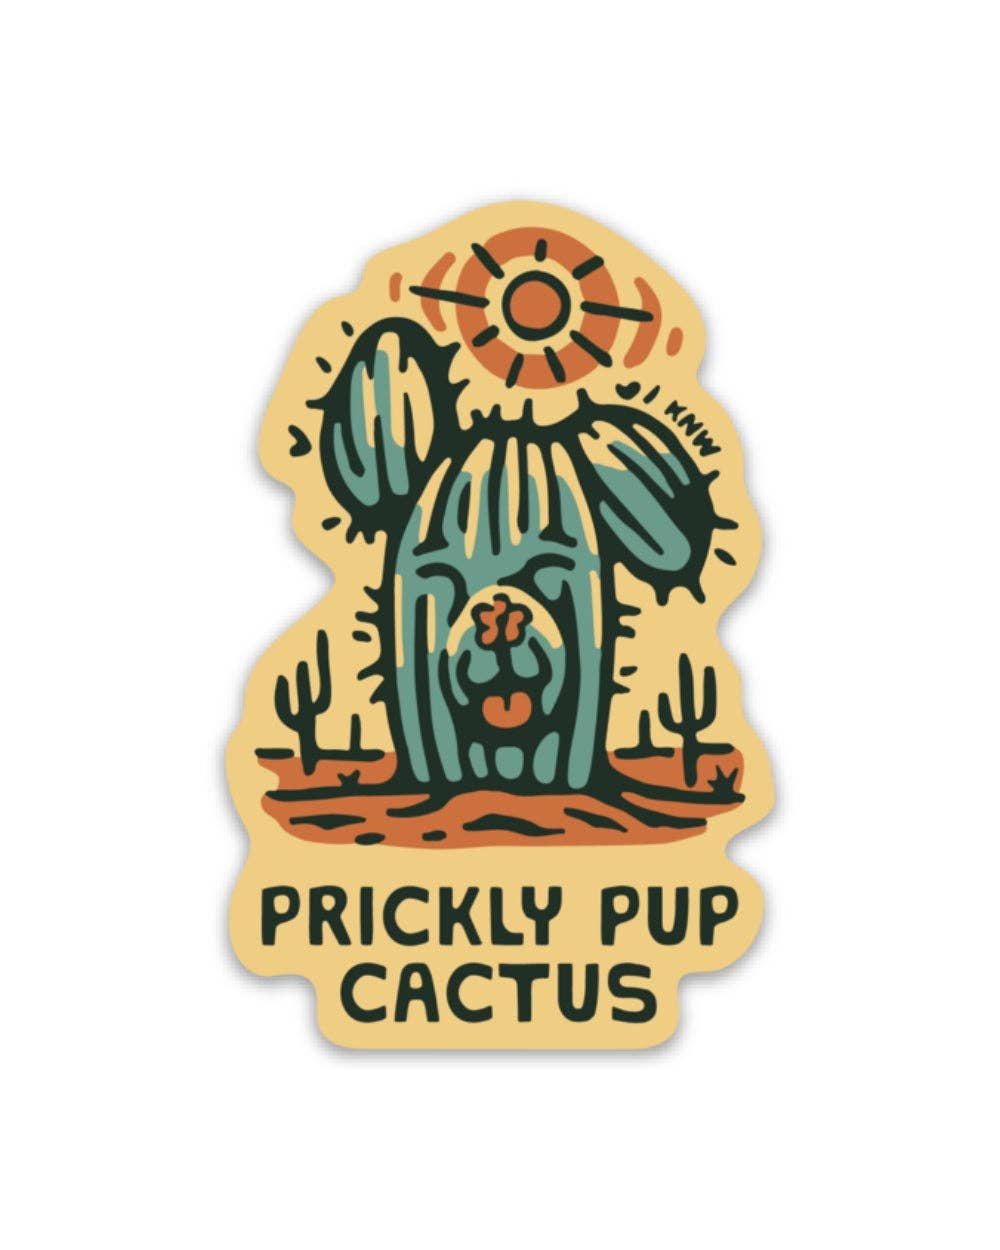 Prickly Pup Cactus | Sticker - Storm and Sky Shoppe - Keep Nature Wild